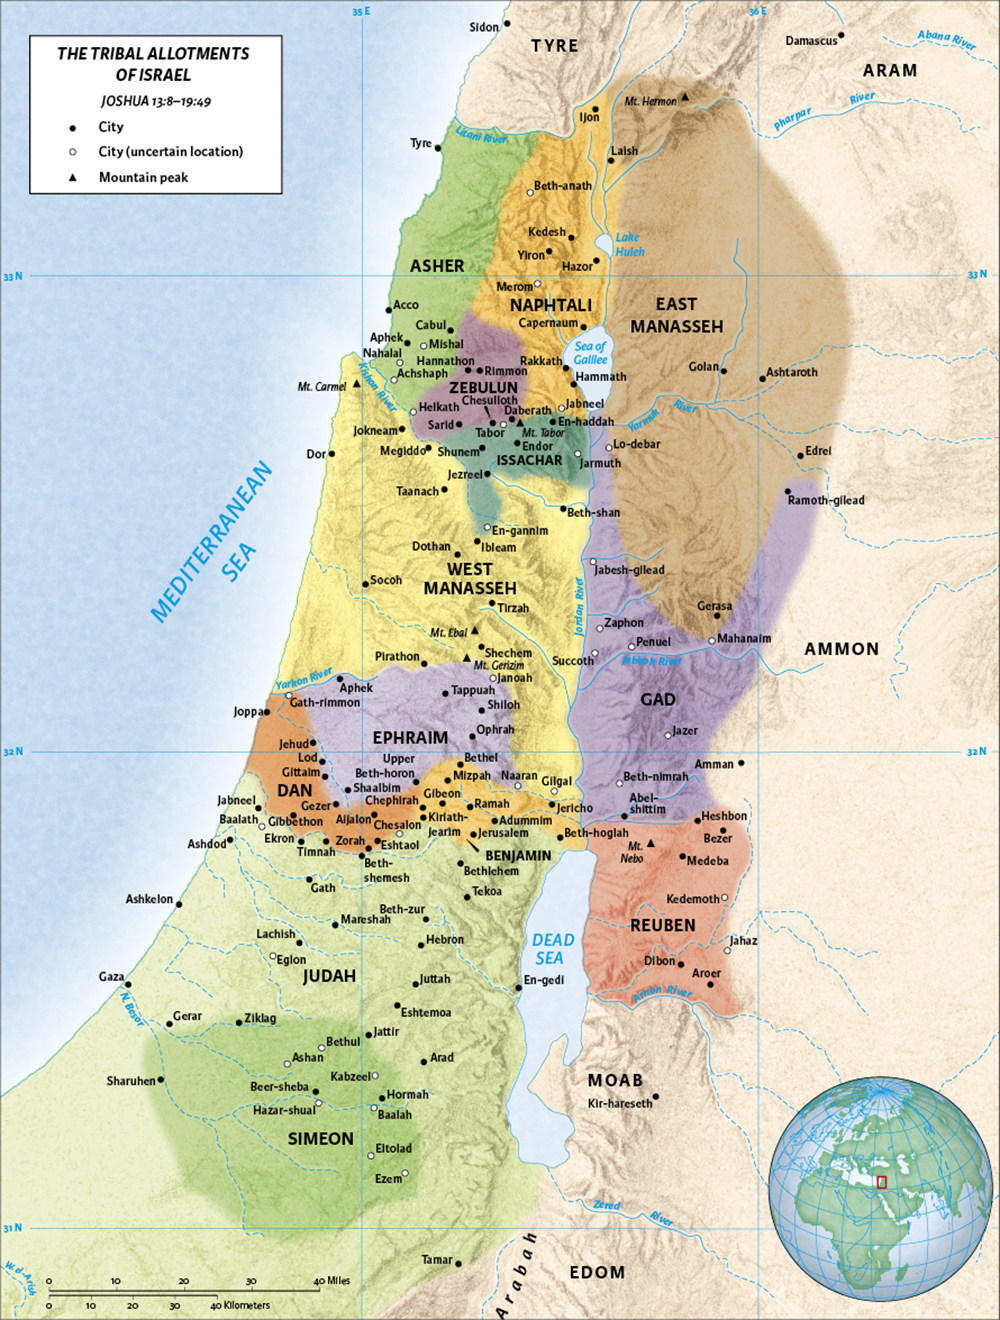 The Tribal Allotments of Israel